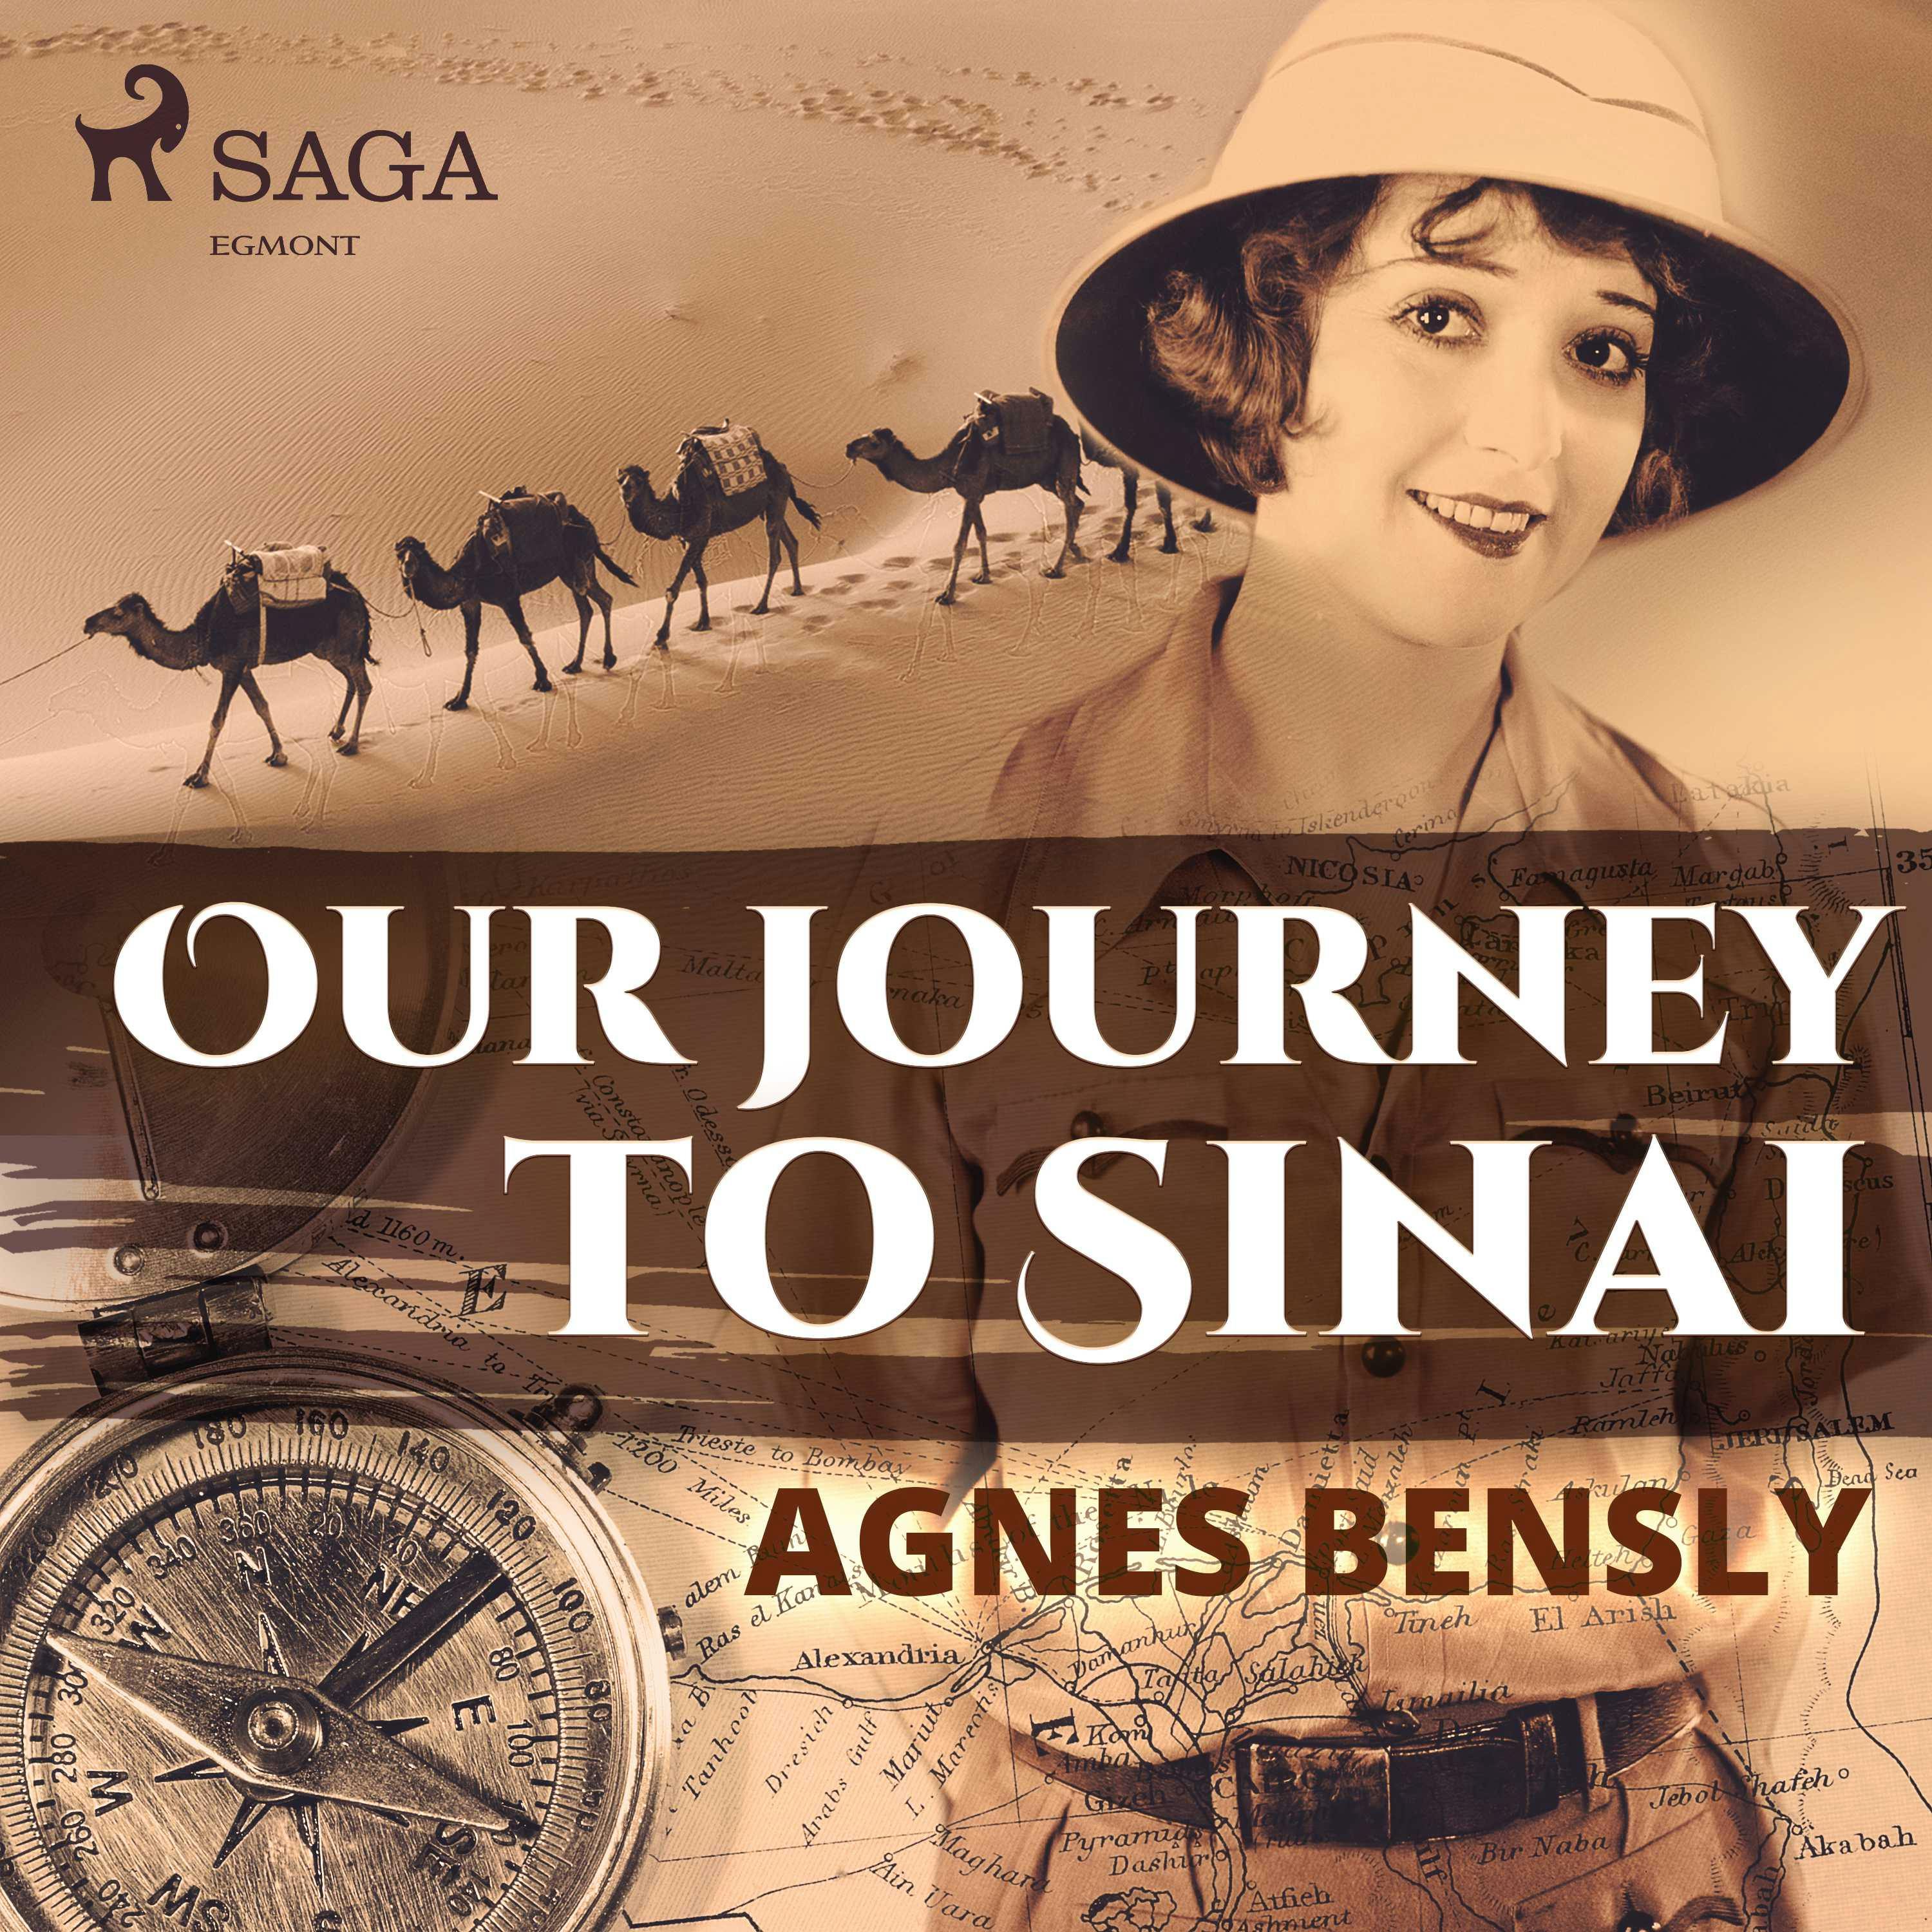 Our Journey to Sinai - Agnes Bensly